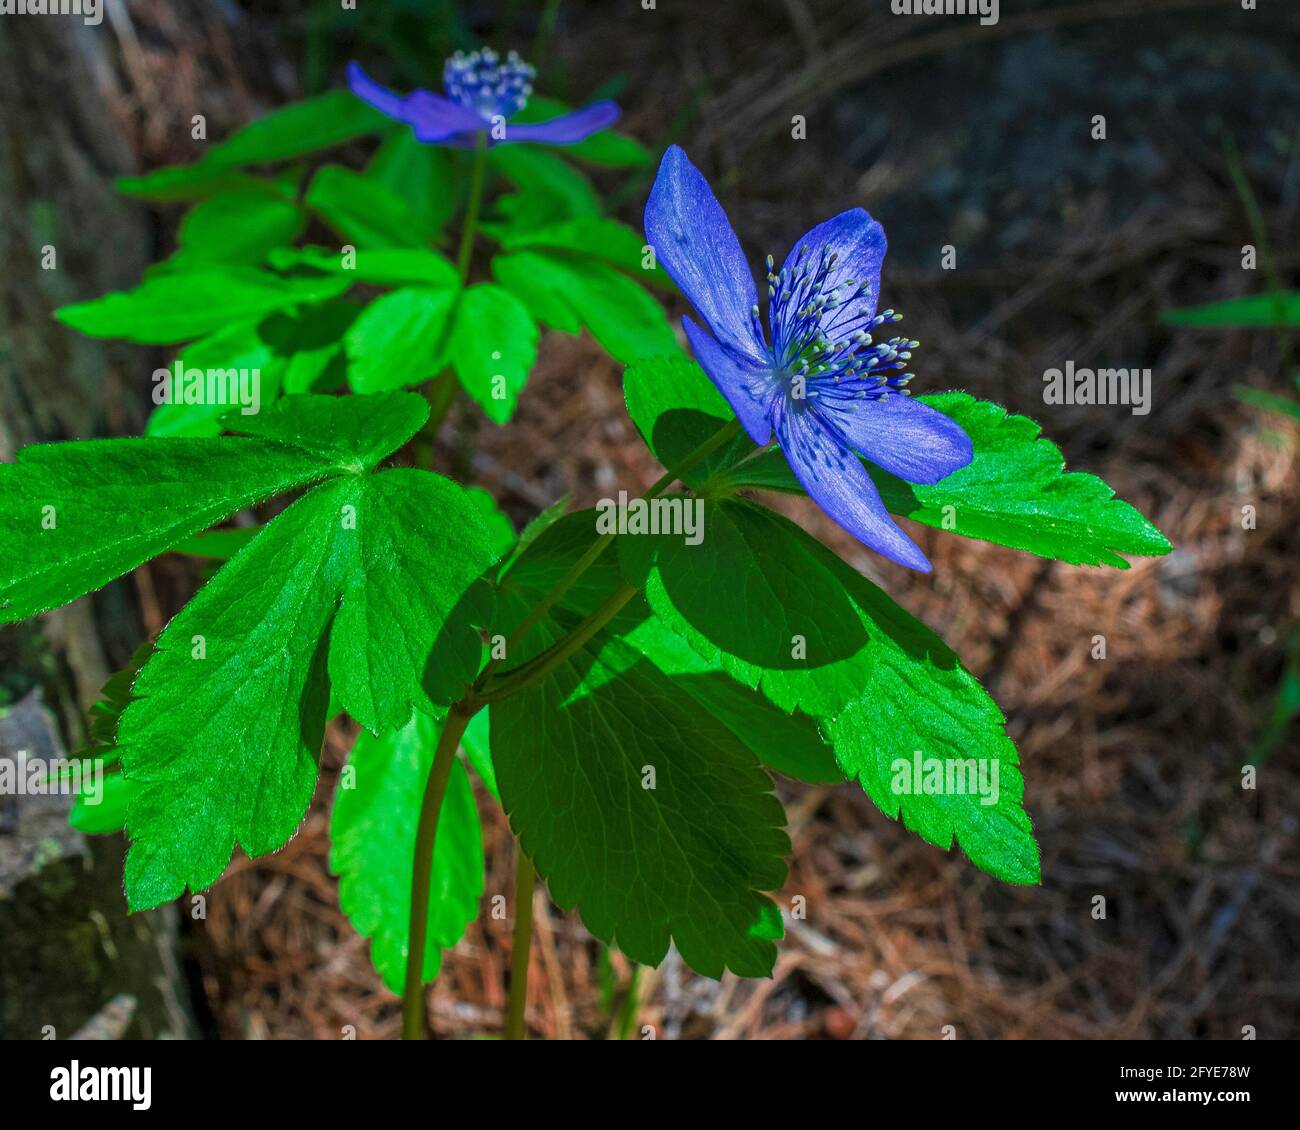 Violet wildflowers blooming in the spring sunshine Stock Photo